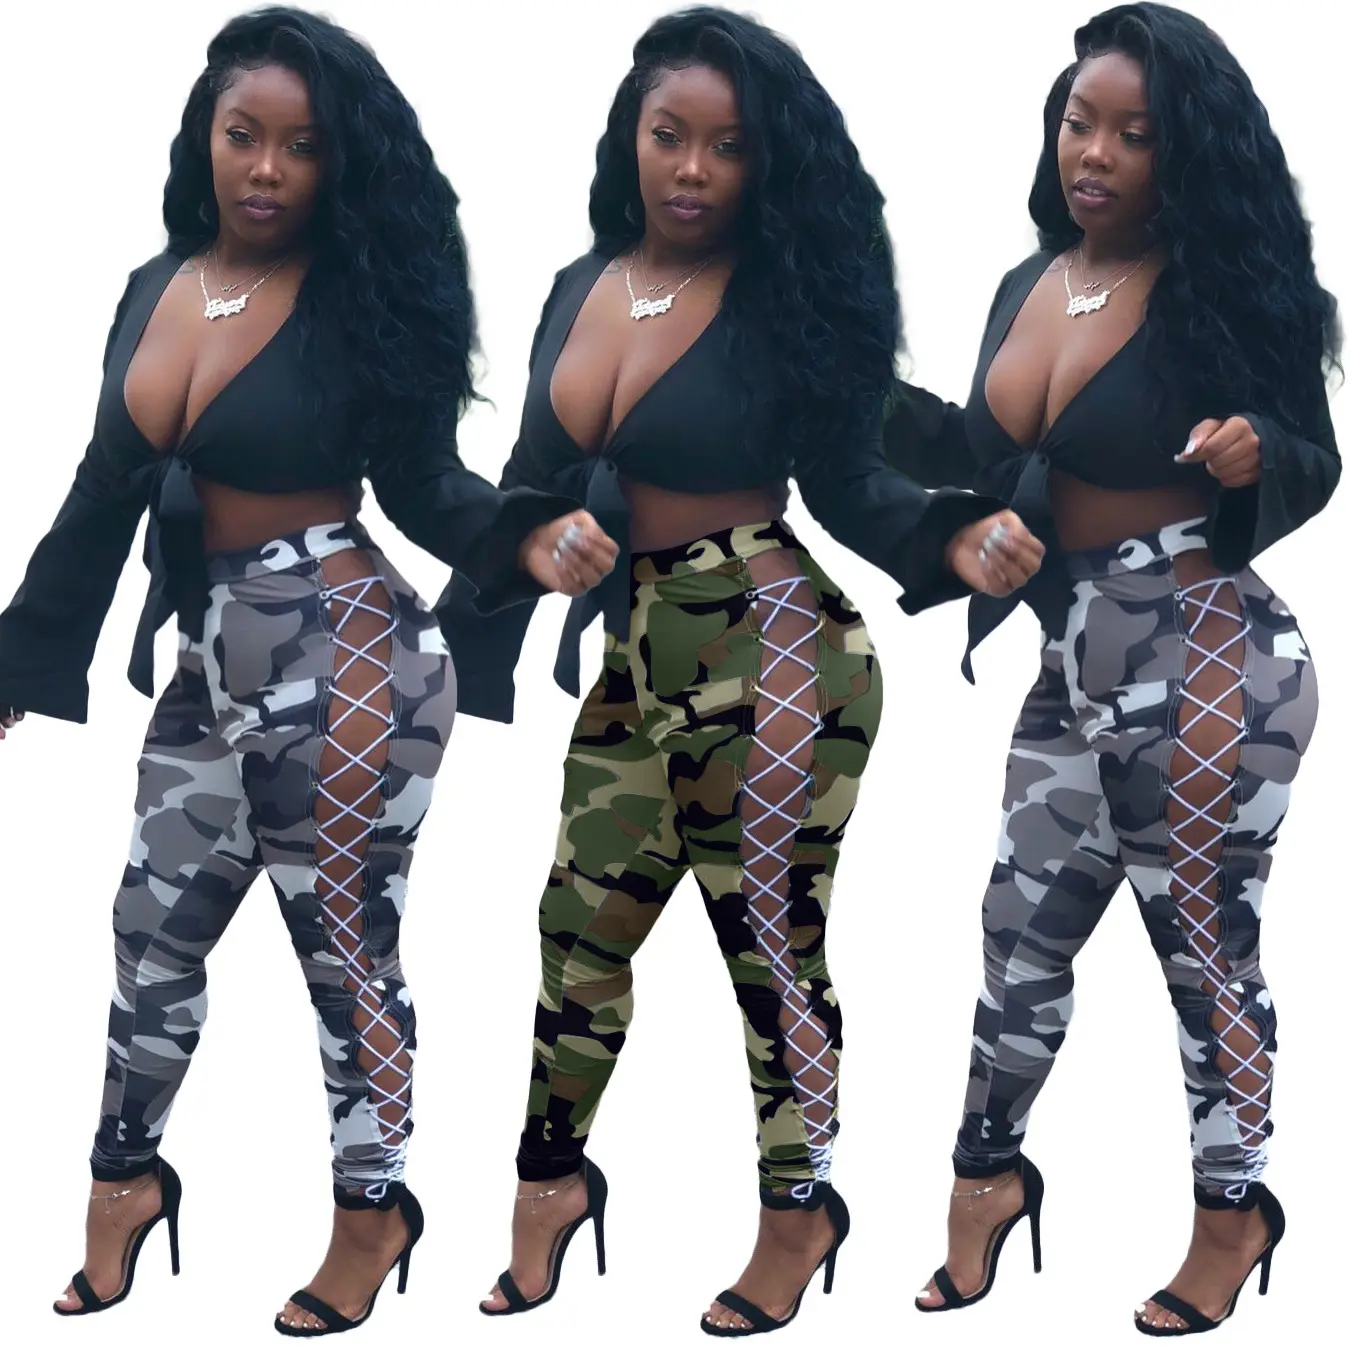 YP Trendy Women Fashion Sexy Hollow Out Pants Lace Up Camouflage Casual Long Trousers High Waist Pants